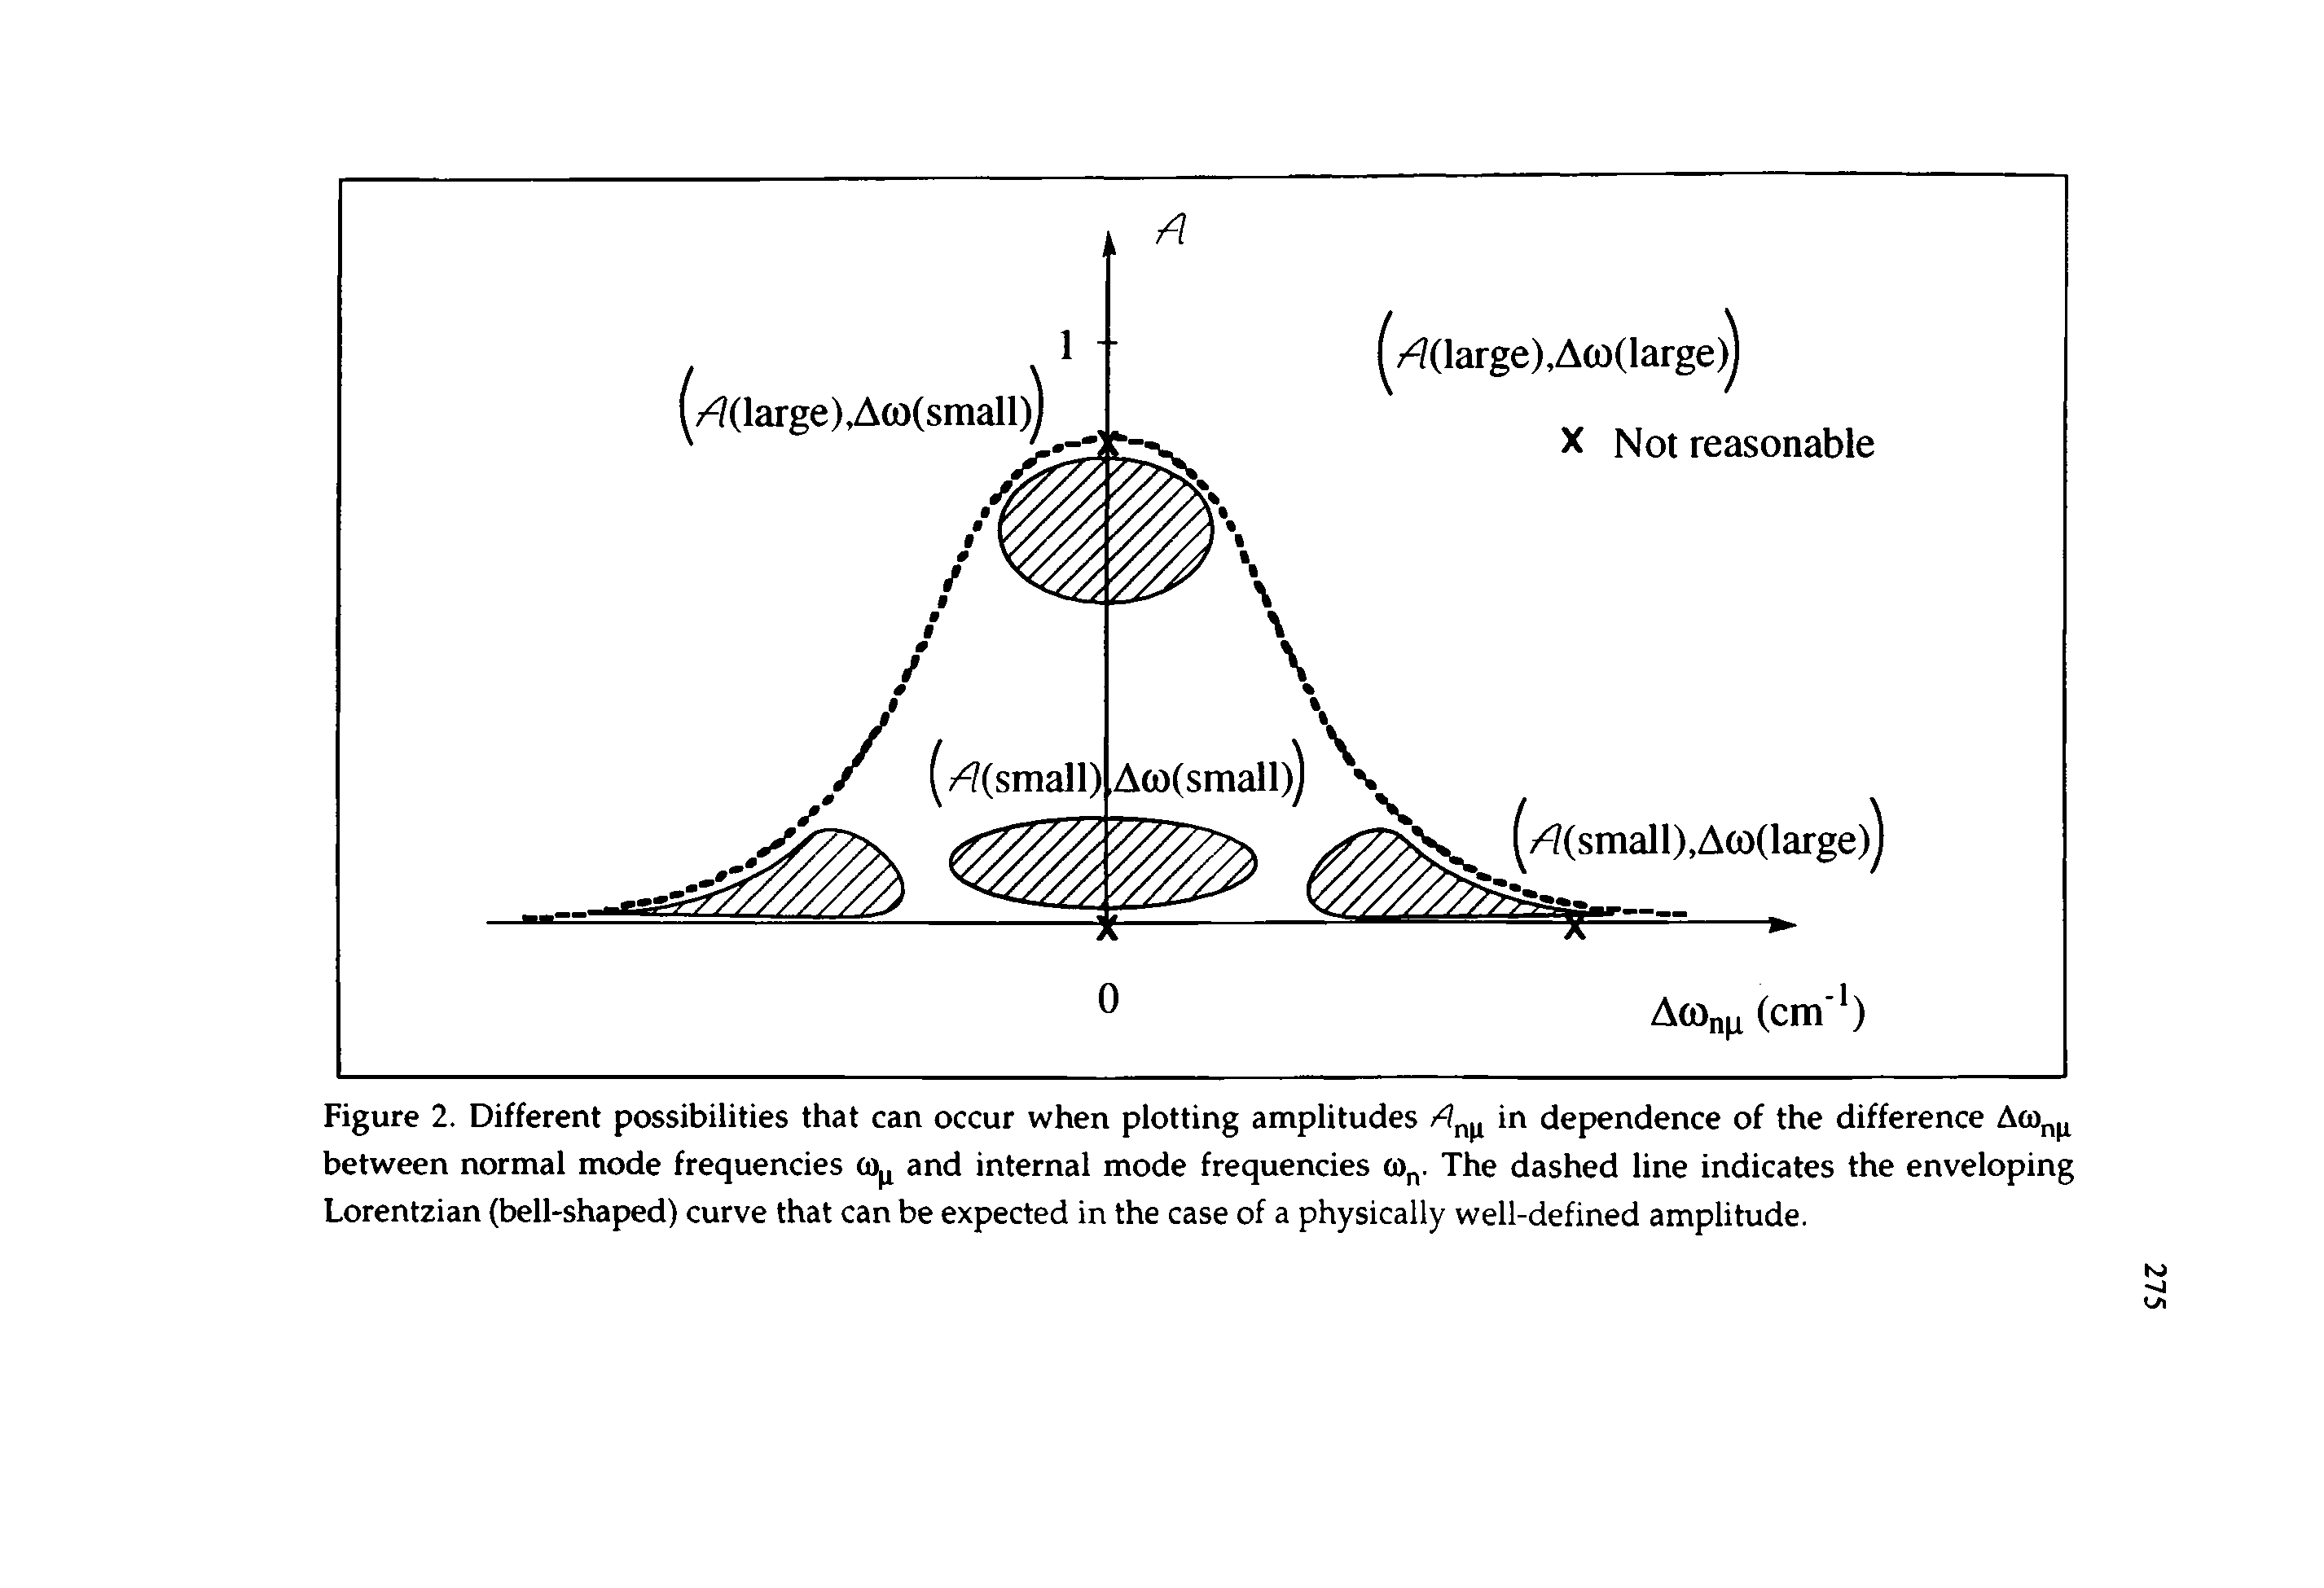 Figure 2. Different possibilities that can occur when plotting amplitudes in dependence of the difference between normal mode frequencies 0) and internal mode frequencies 0), . The dashed line indicates the enveloping Lorentzian (bell-shaped) curve that can be expected in the case of a physically well-defined amplitude.